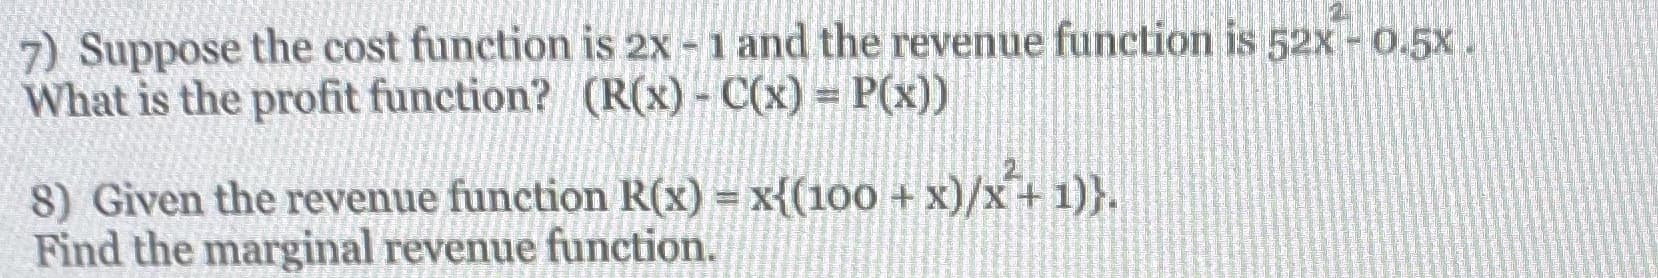 7) Suppose the cost function is 2x - 1 and the revenue function is 52X - 0.5X.
What is the profit function? (R(x)- C(x) = P(x))
x)/x*+ 1)}.
8) Given the revenue function R(x) = x{(100 +
Find the marginal revenue function.
